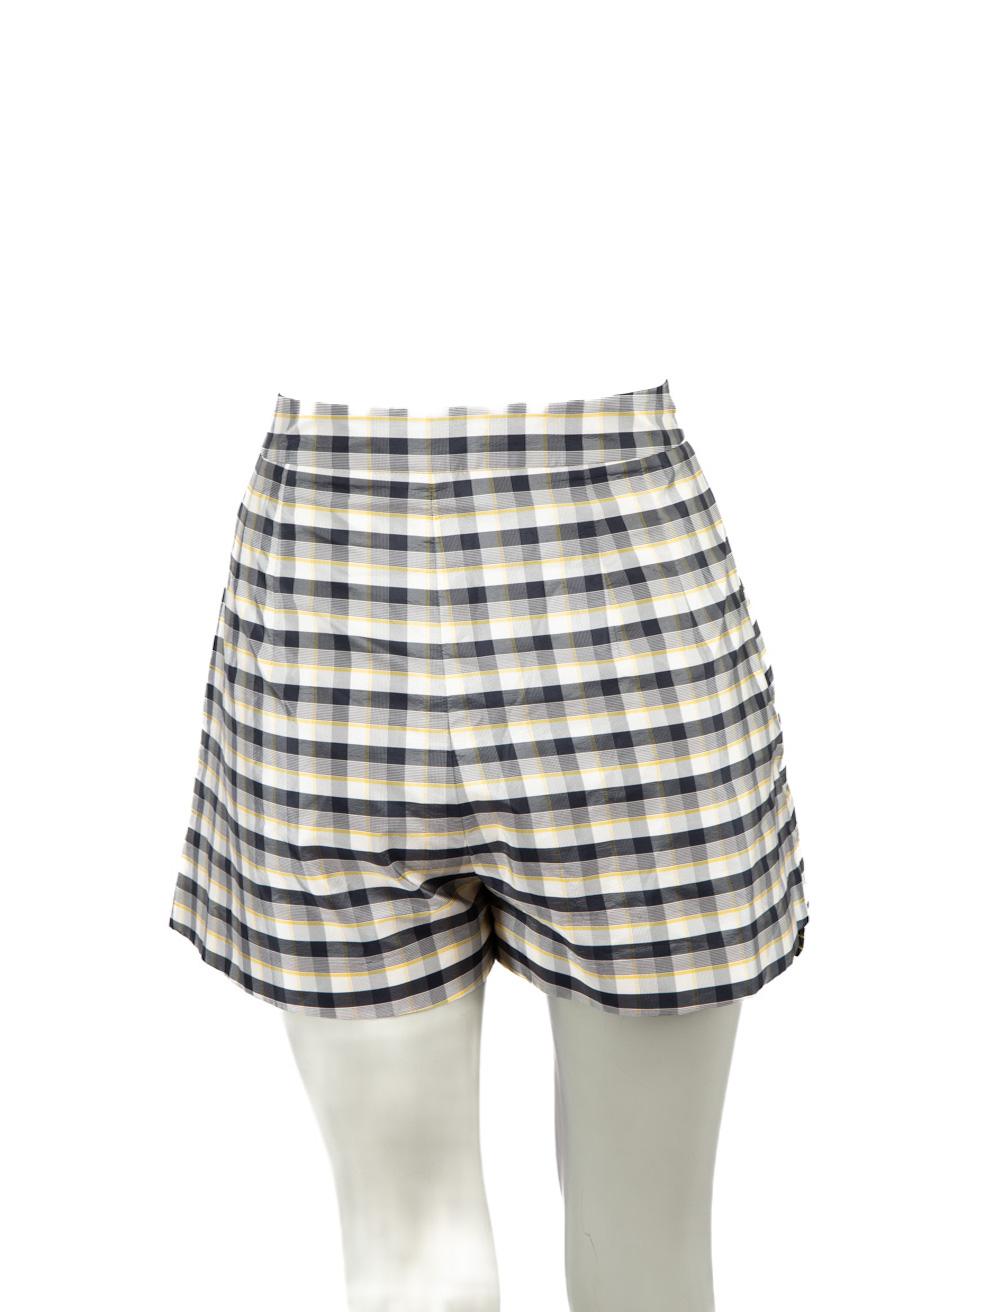 Dior Checkered Silk Mini Shorts Size XL In Excellent Condition For Sale In London, GB